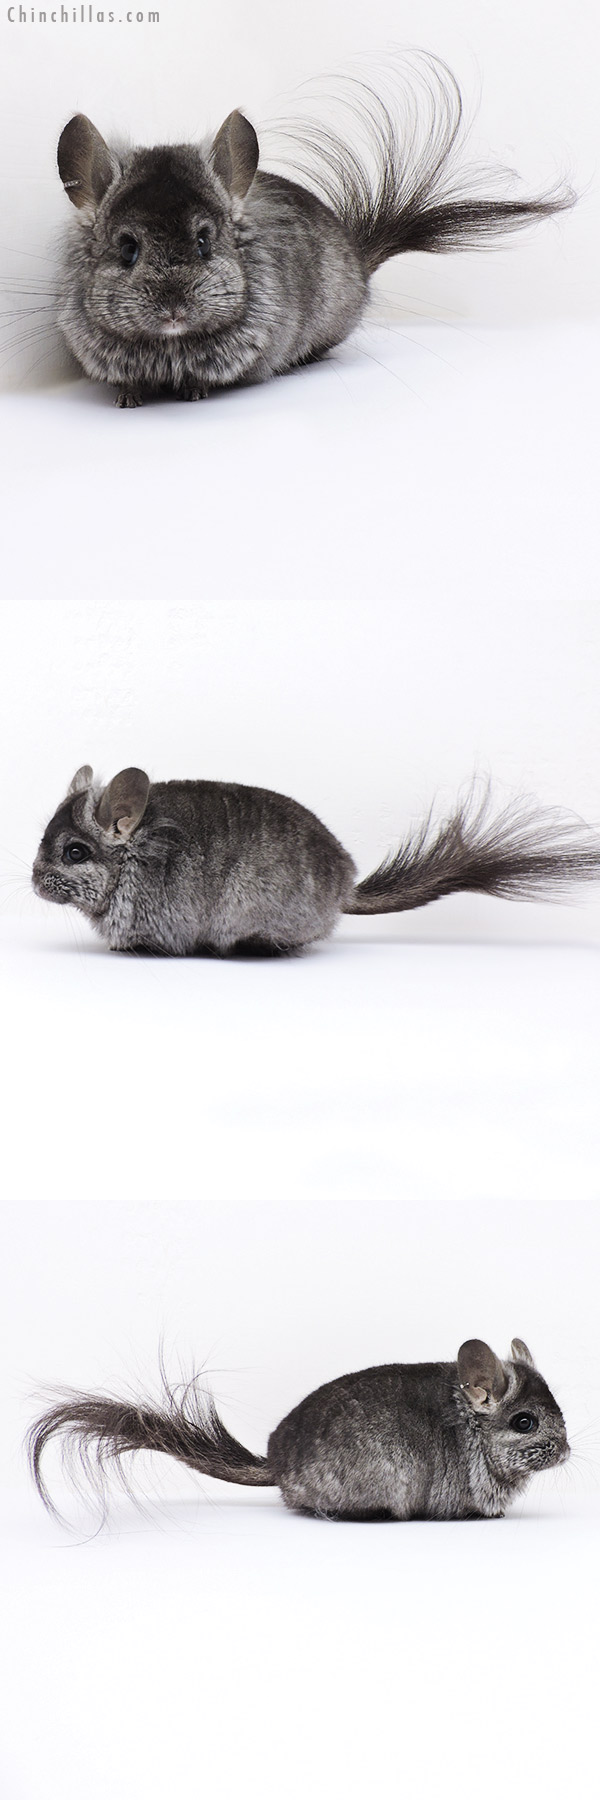 Chinchilla or related item offered for sale or export on Chinchillas.com - 19009 Ebony ( Locken Carrier )  Royal Persian Angora Female Chinchilla